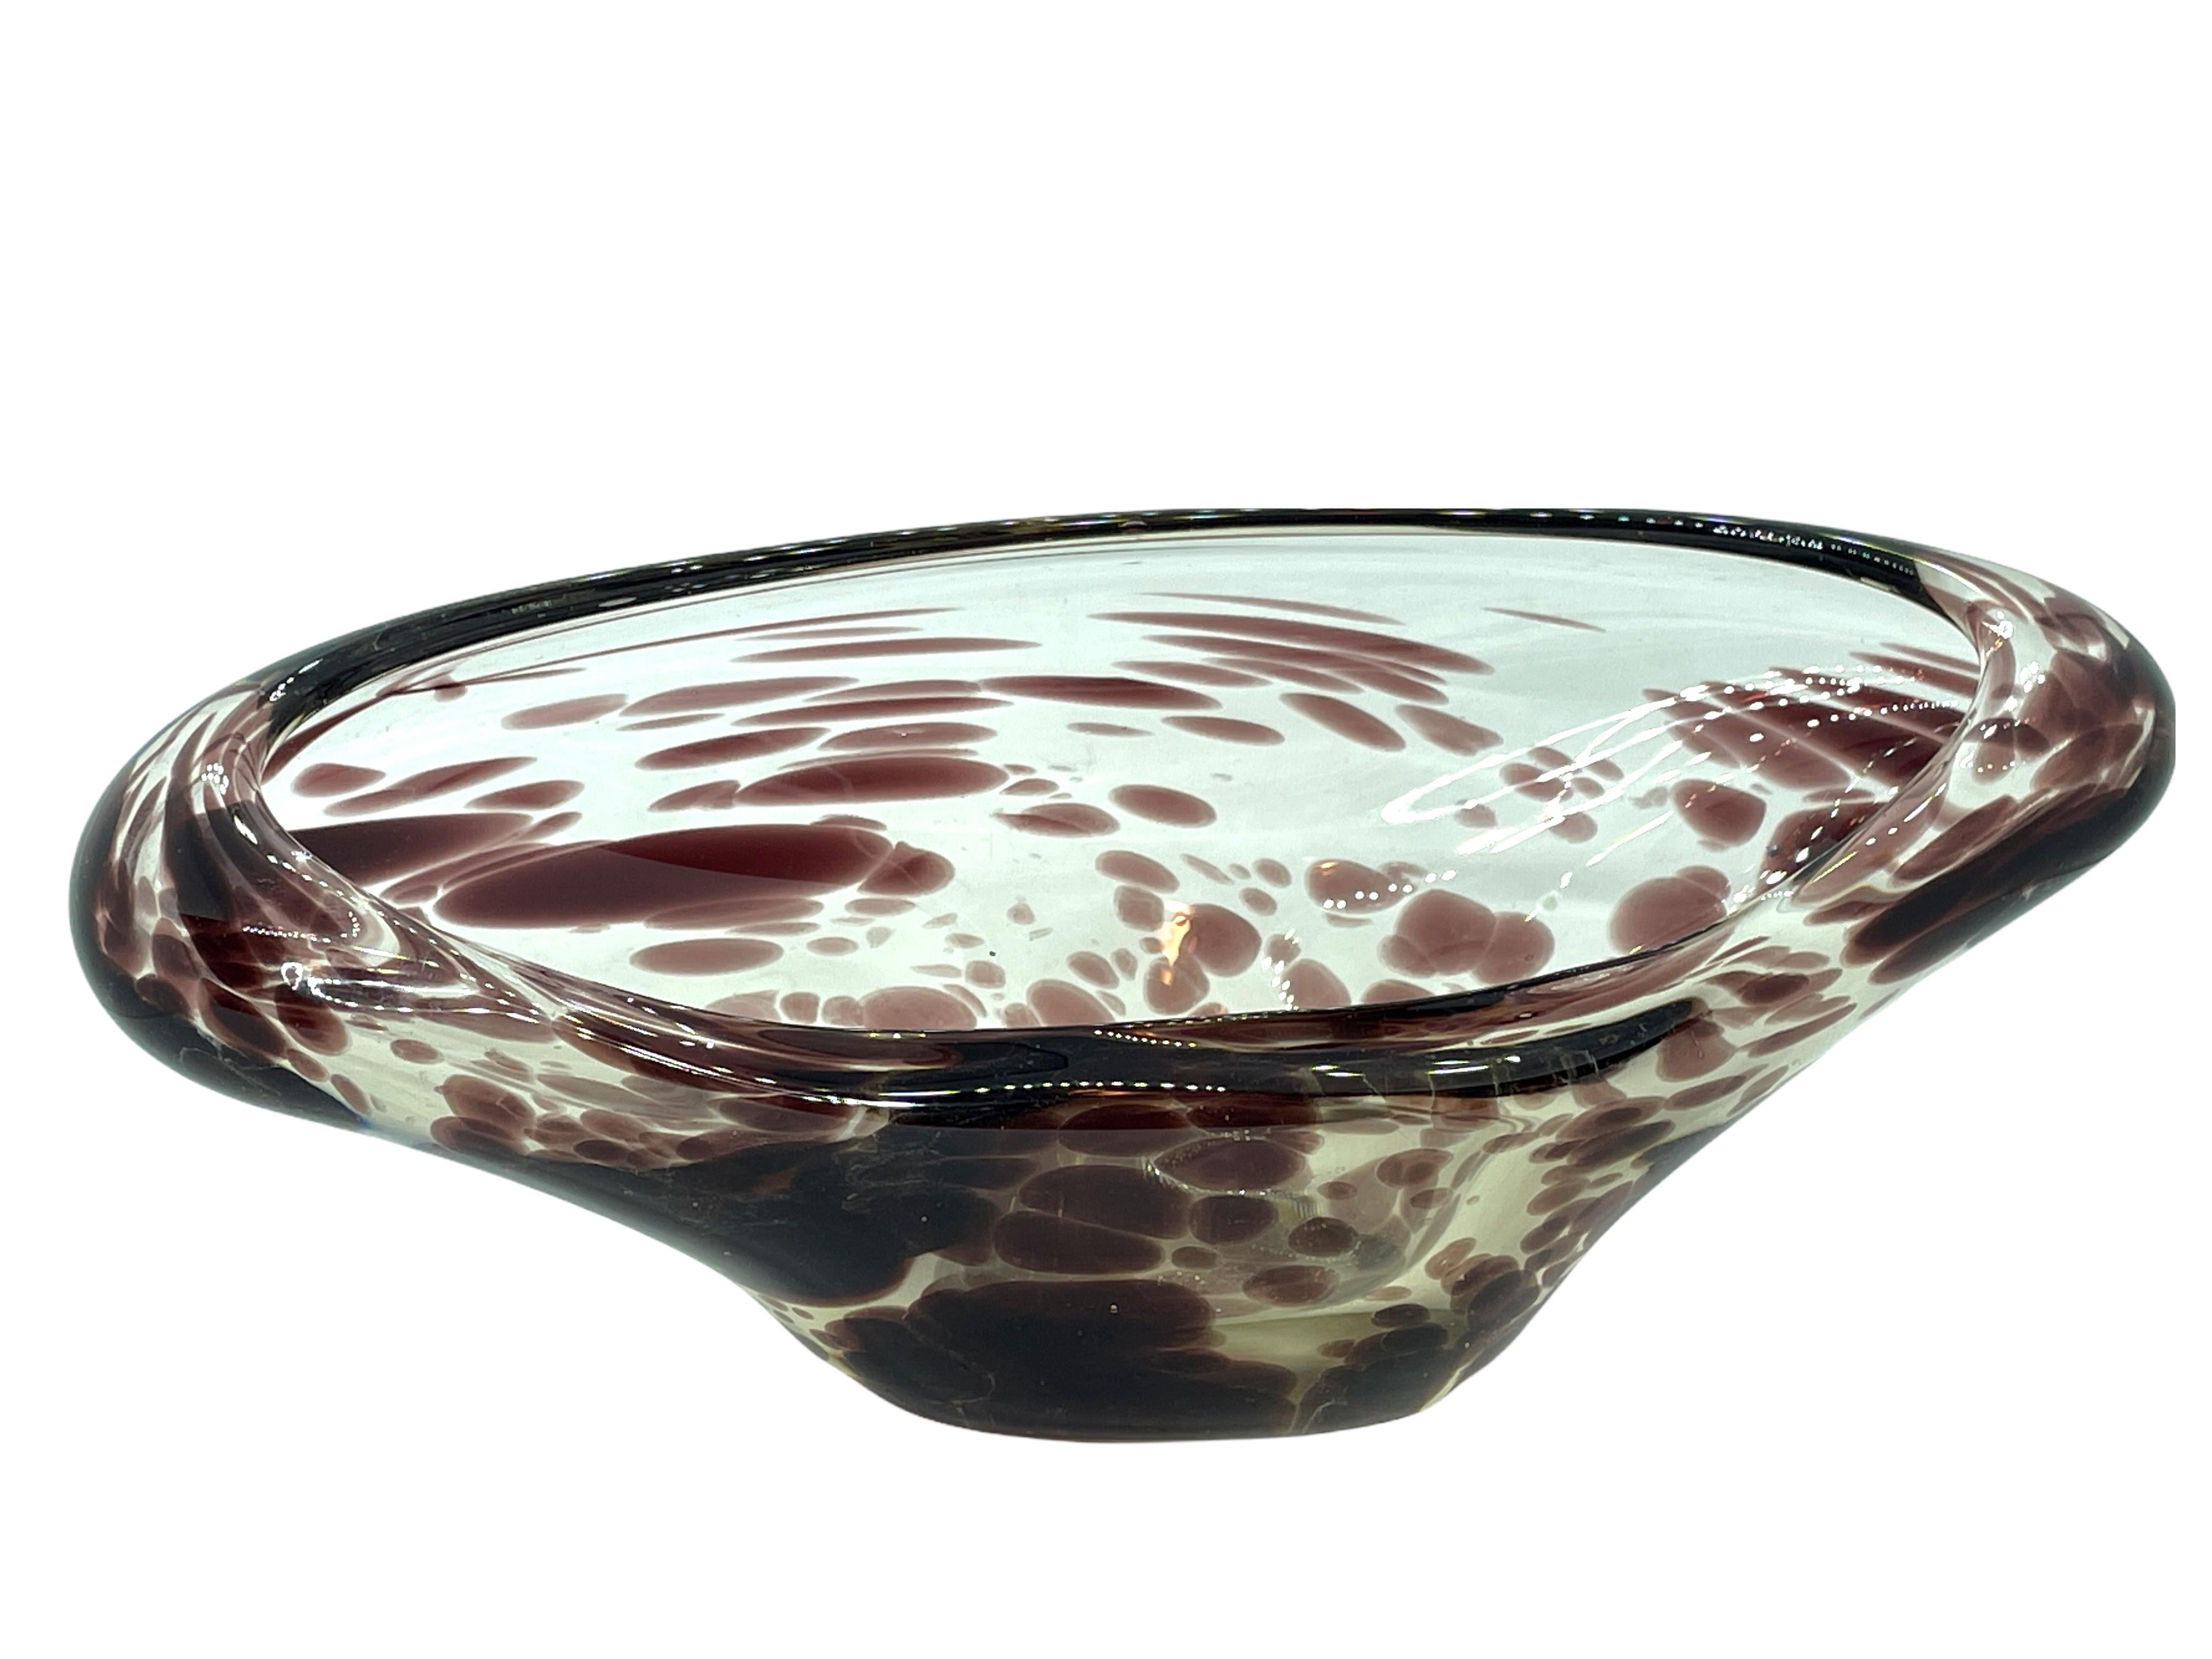 Gorgeous hand blown Murano art glass piece with Sommerso and bullicante techniques. A beautiful organic shaped bowl or catchall in dark purple and clear color, Italy, 1980s.